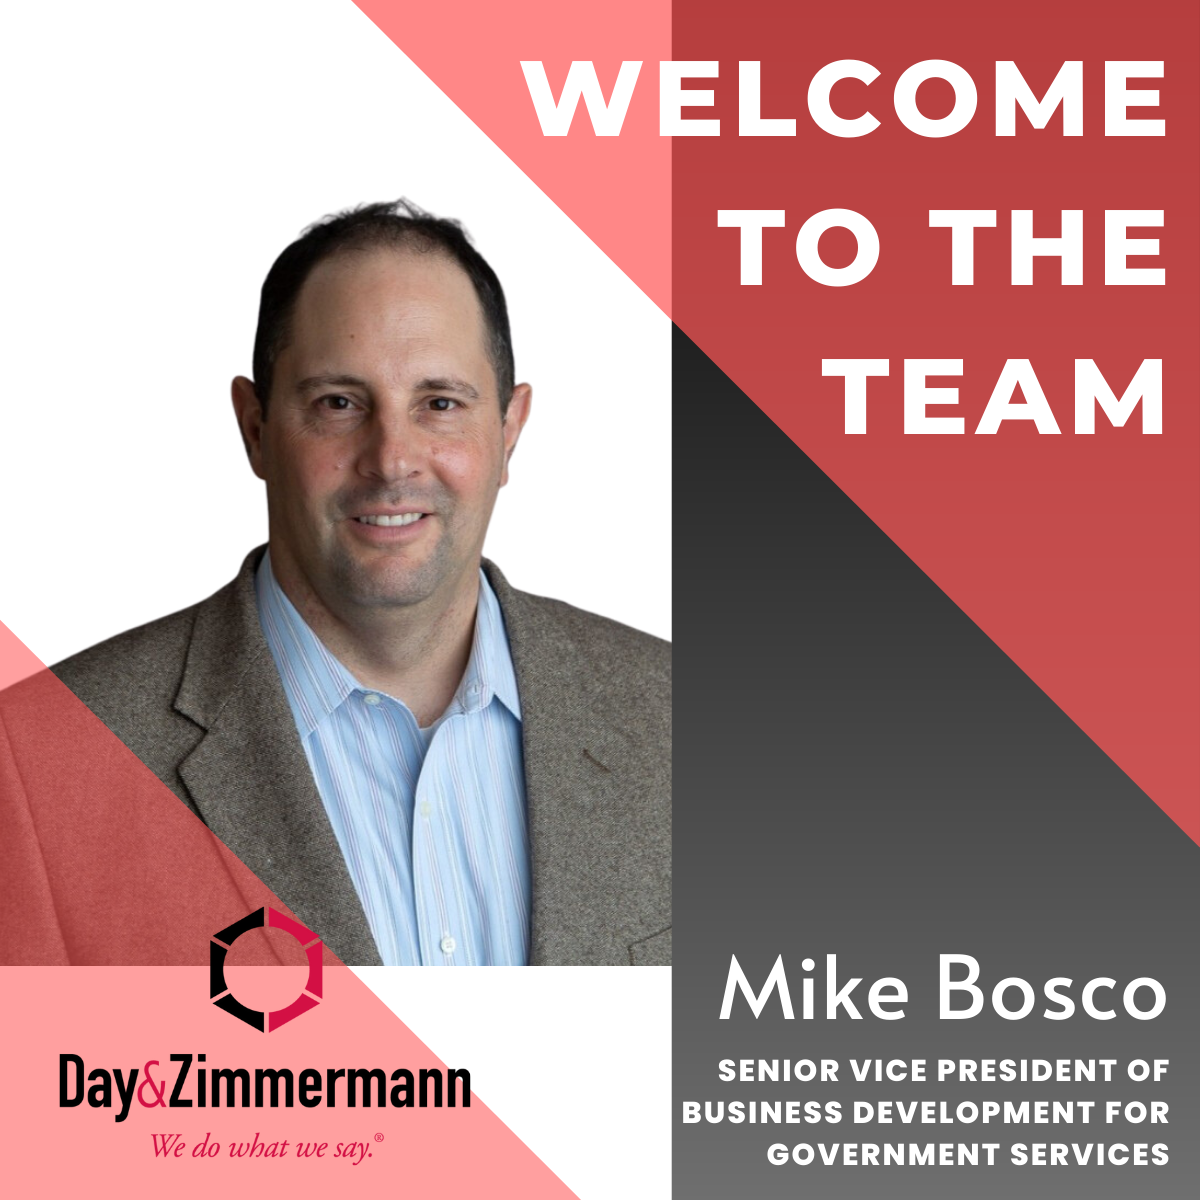 IN THE NEWS: Day & Zimmermann Government Services Announces the Appointment of Mike Bosco to Lead Business Development Group